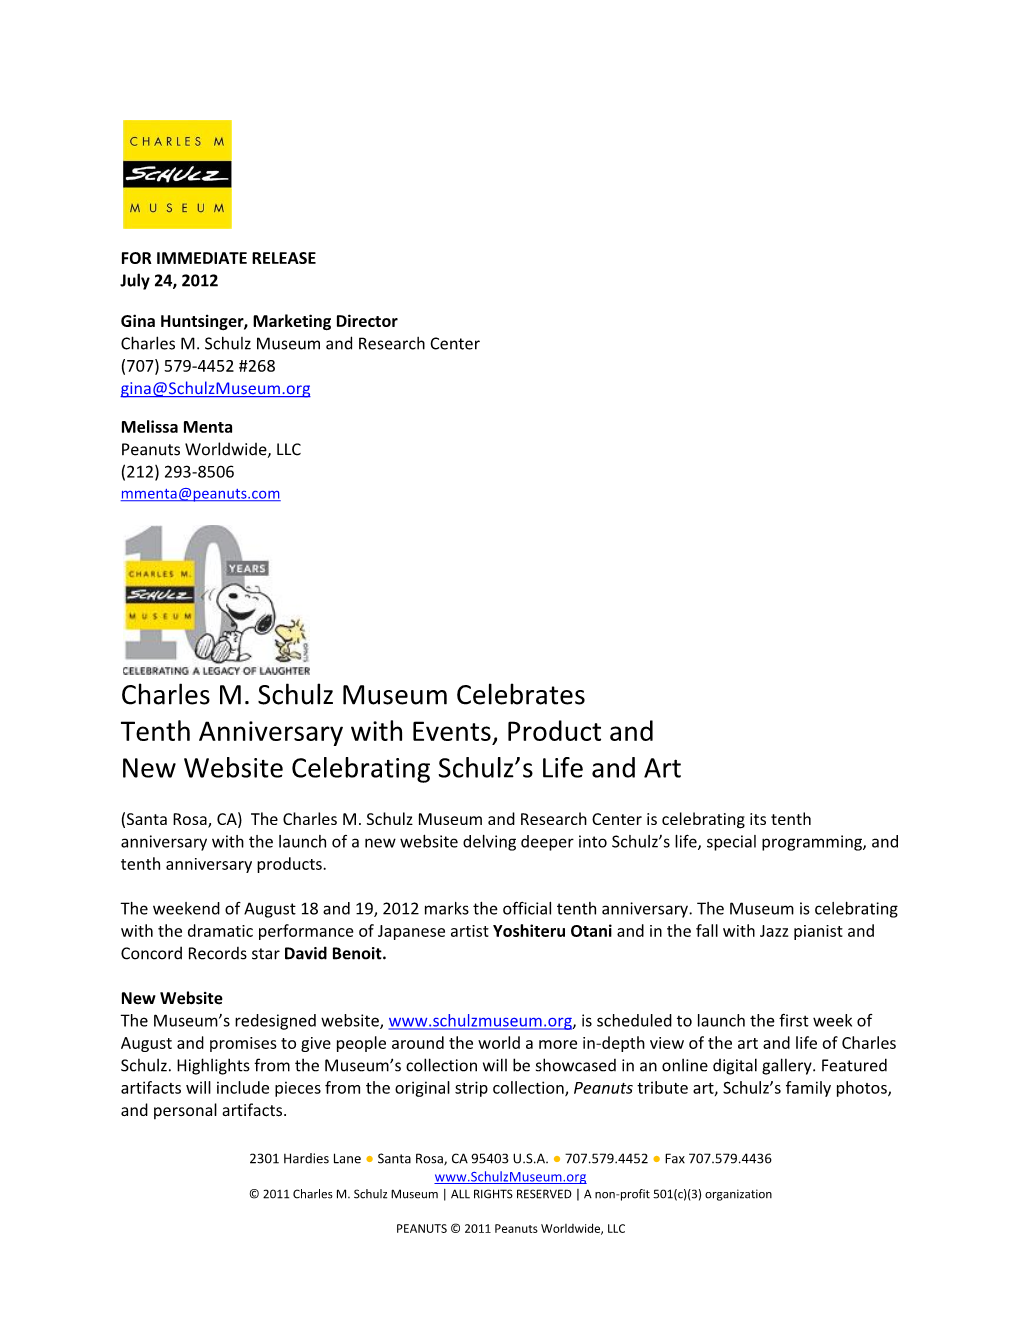 Charles M. Schulz Museum Celebrates Tenth Anniversary with Events, Product and New Website Celebrating Schulz’S Life and Art